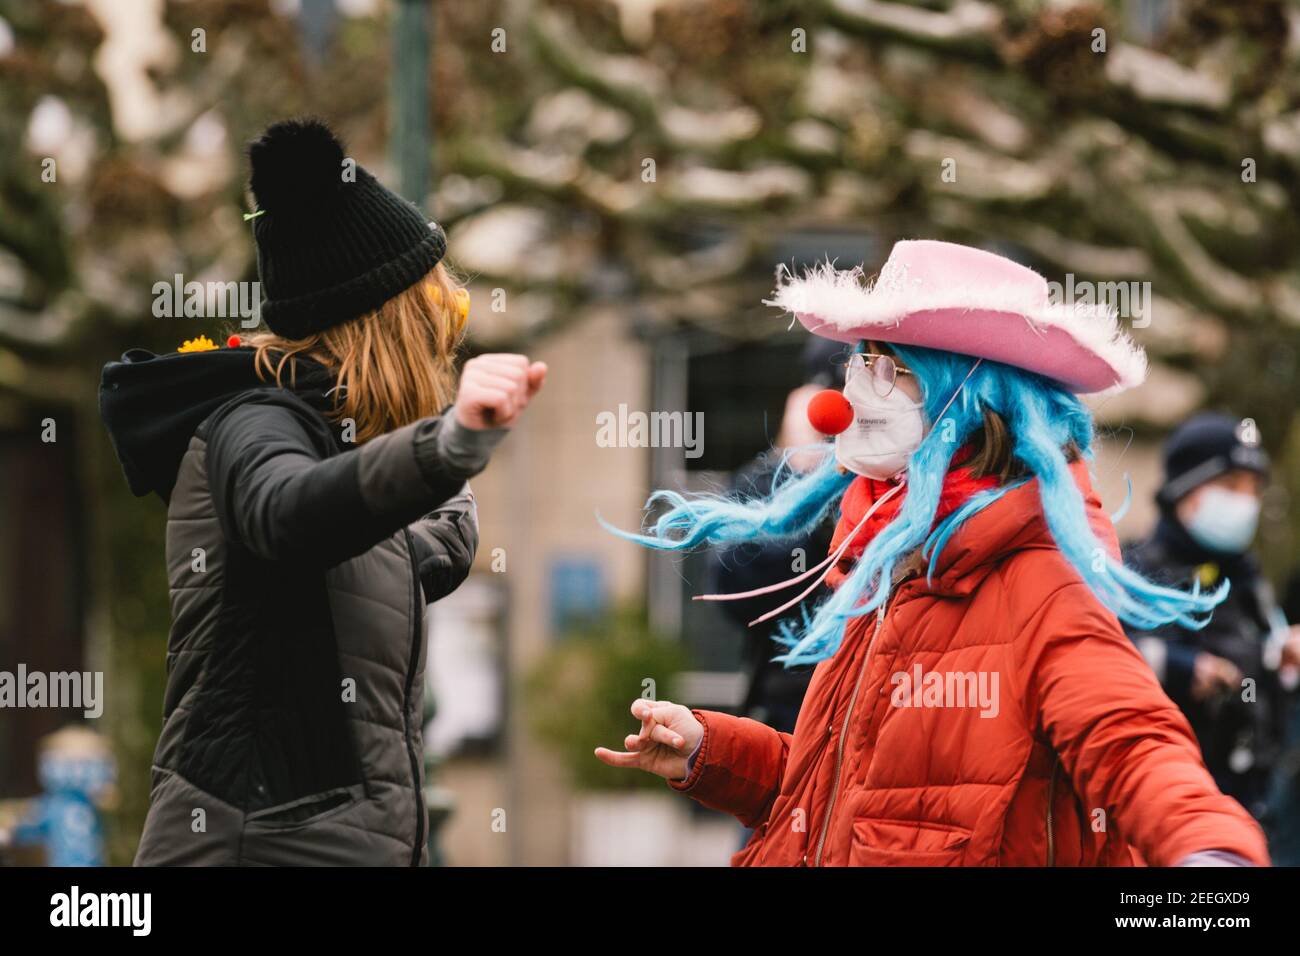 Dusseldorf, Germany. 15th Feb, 2021. People with facial masks dress up during the German carnival season amid COVID-19 pandemic in Dusseldorf, Germany, Feb. 15, 2021. Most of the traditional German carnival activities have been cancelled this year due to the COVID-19 pandemic. Some people dressed up here with sufficient COVID-19 prevention and control measures on Monday. Credit: Tang Ying/Xinhua/Alamy Live News Stock Photo